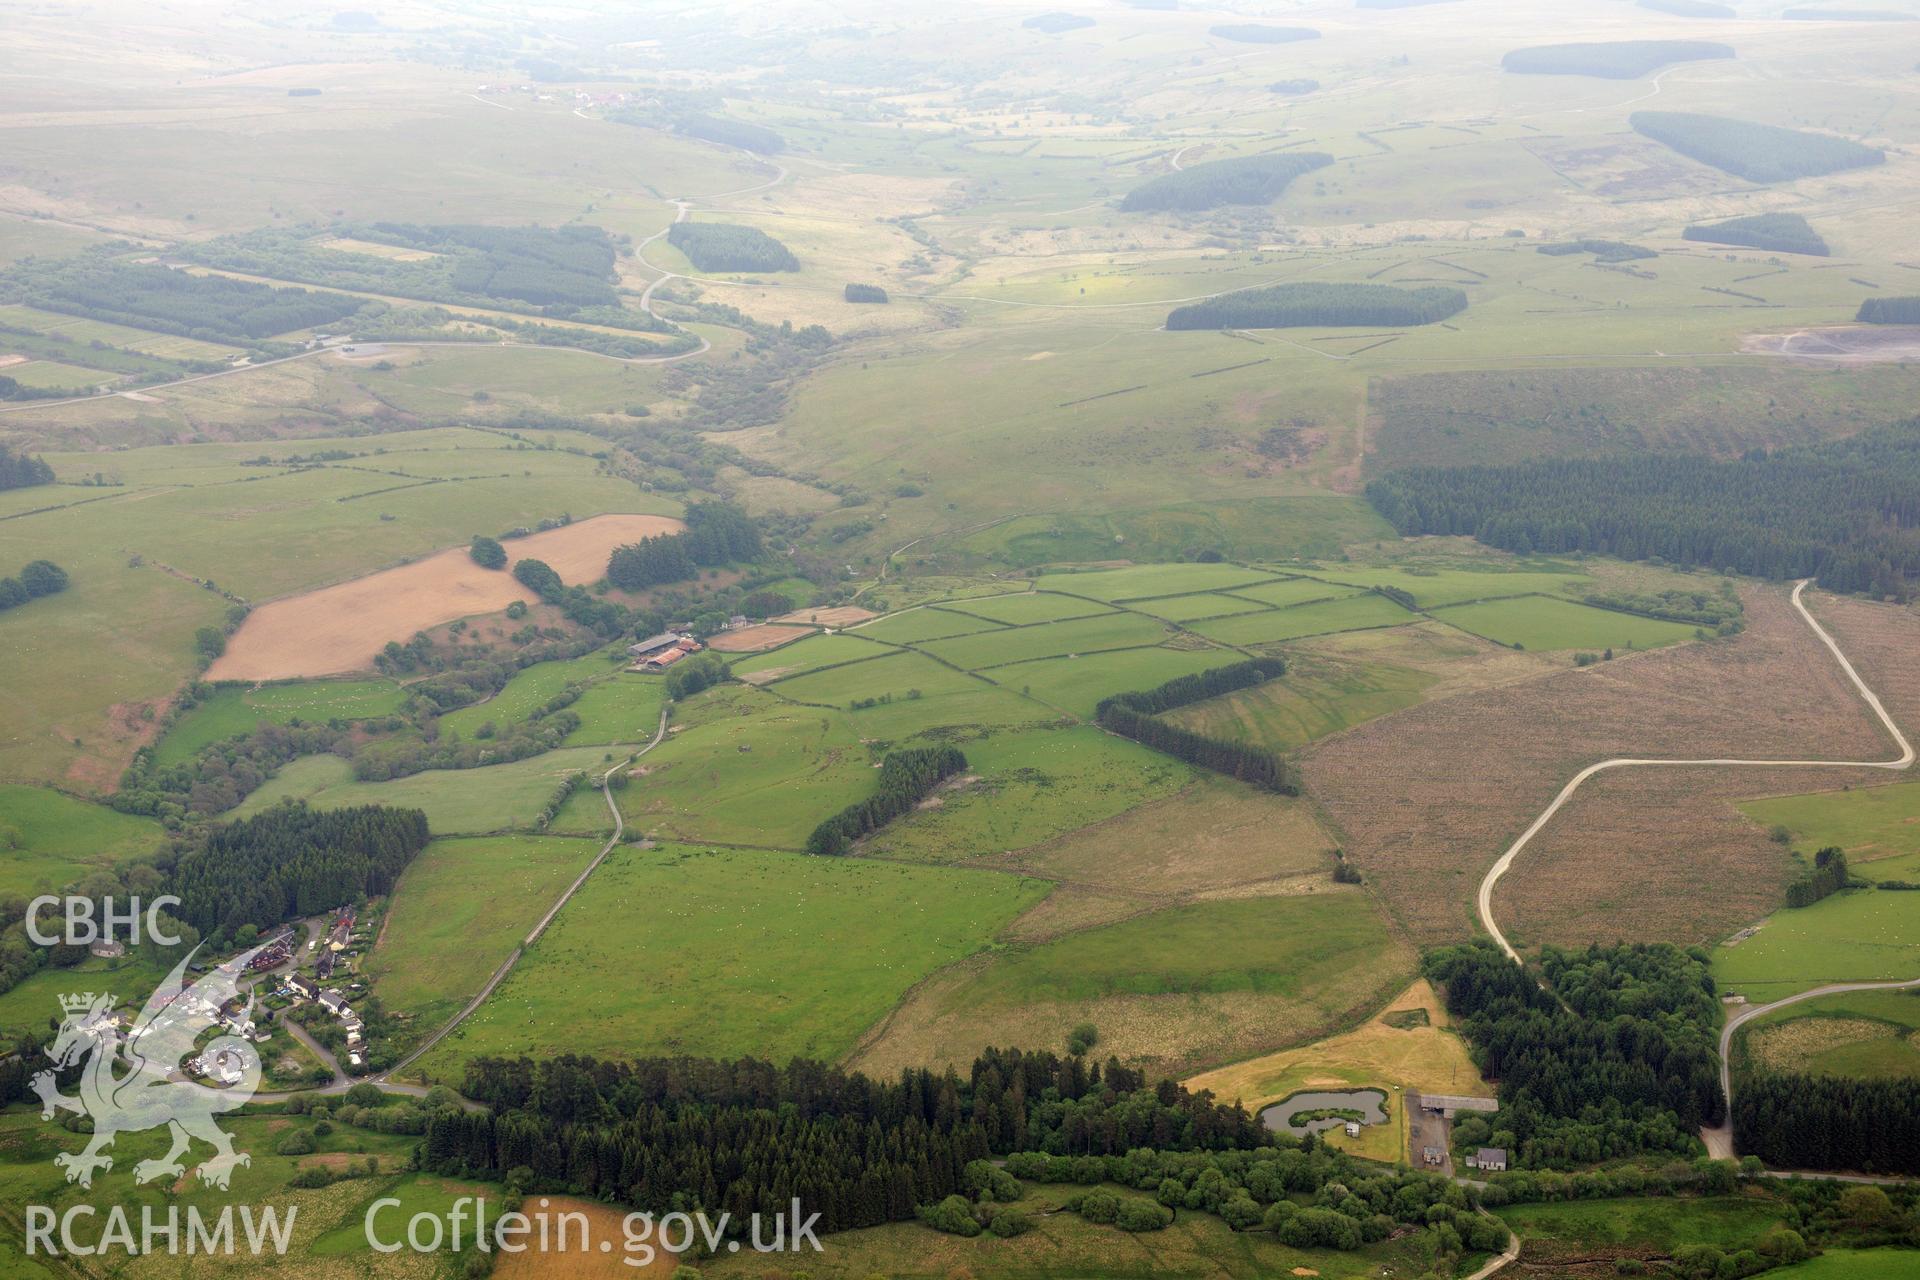 Tirabad village including views of Tirabad enclosure; an enclosure at Gledrydd, near Tirabad and a possible Roman fort at Caerau, Tirabad near Llanwrtyd Wells. Oblique aerial photograph taken during the Royal Commission's programme of archaeological aerial reconnaissance by Toby Driver on 11th June 2015.